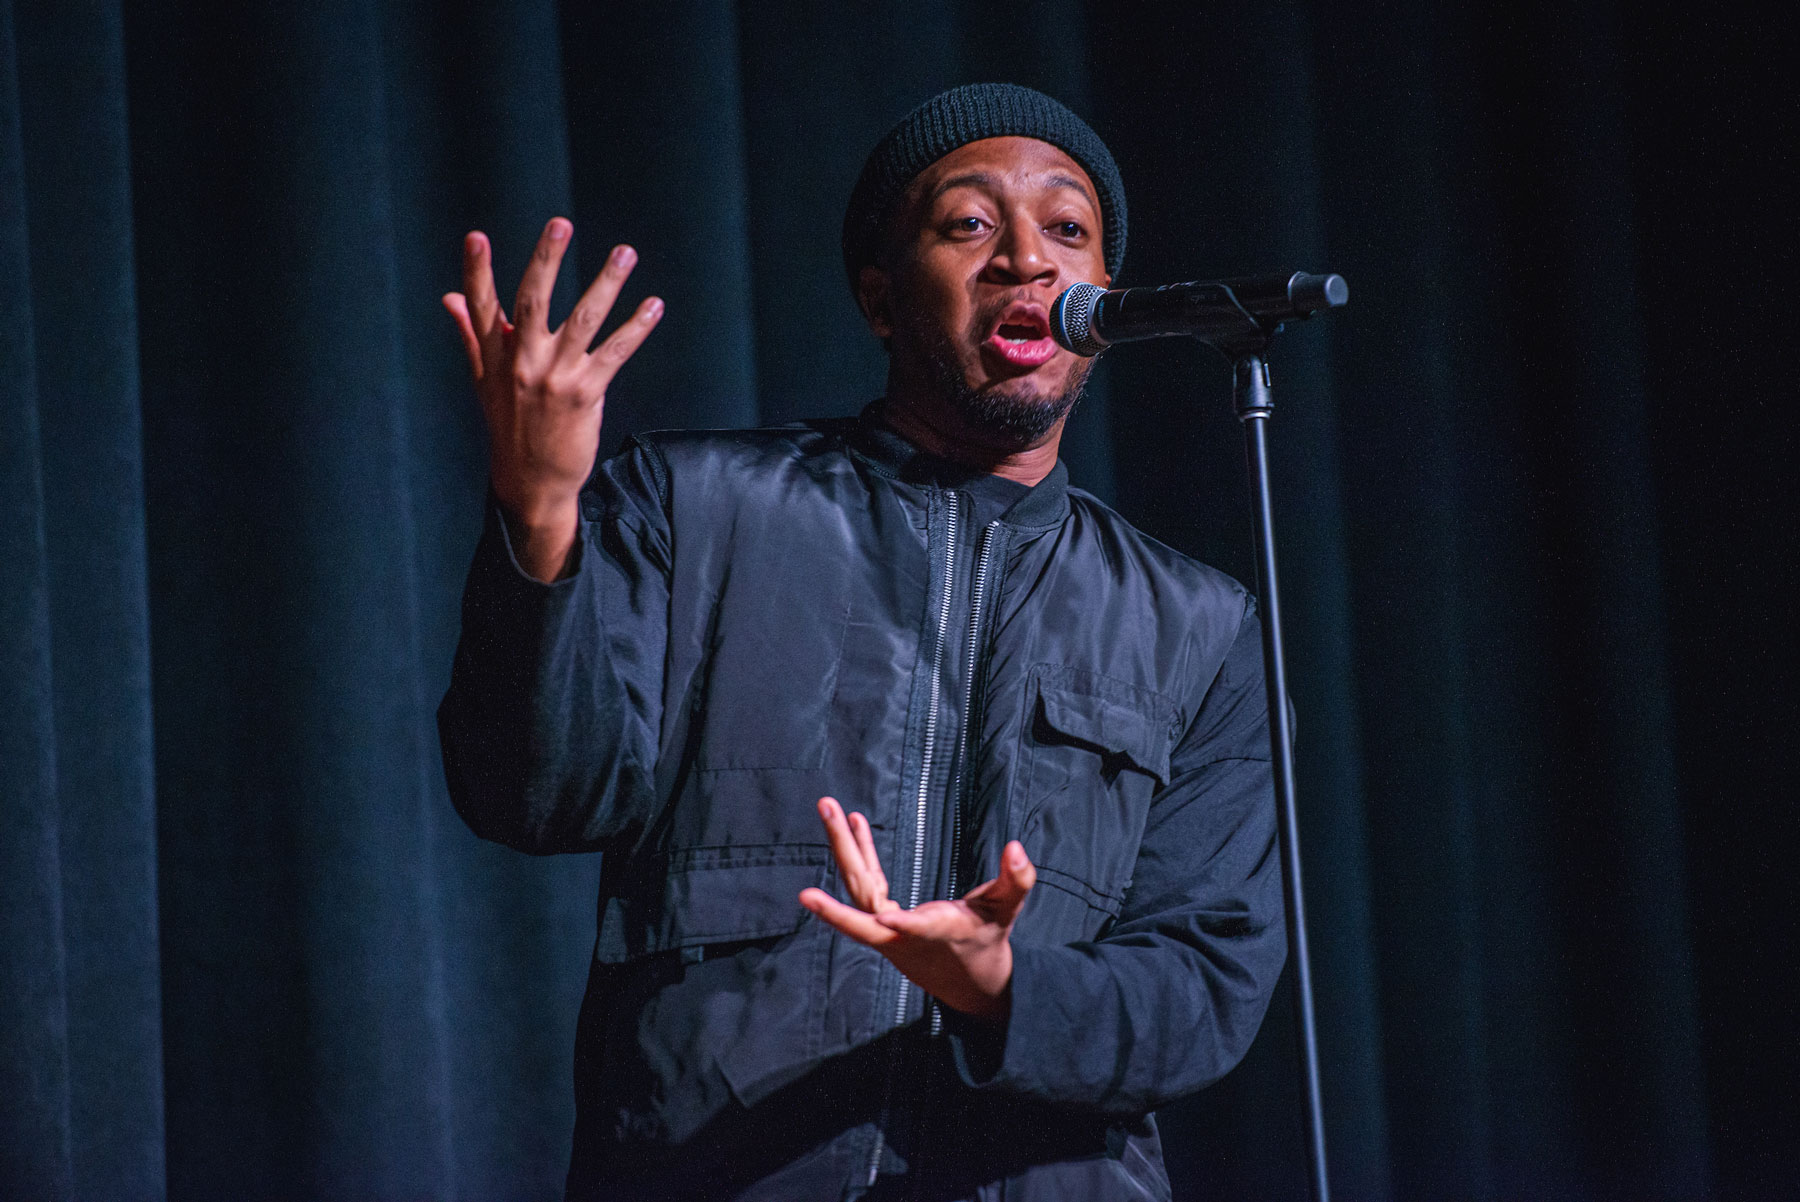 A man performing on stage during the MLK Jr. Day arts cypher event.